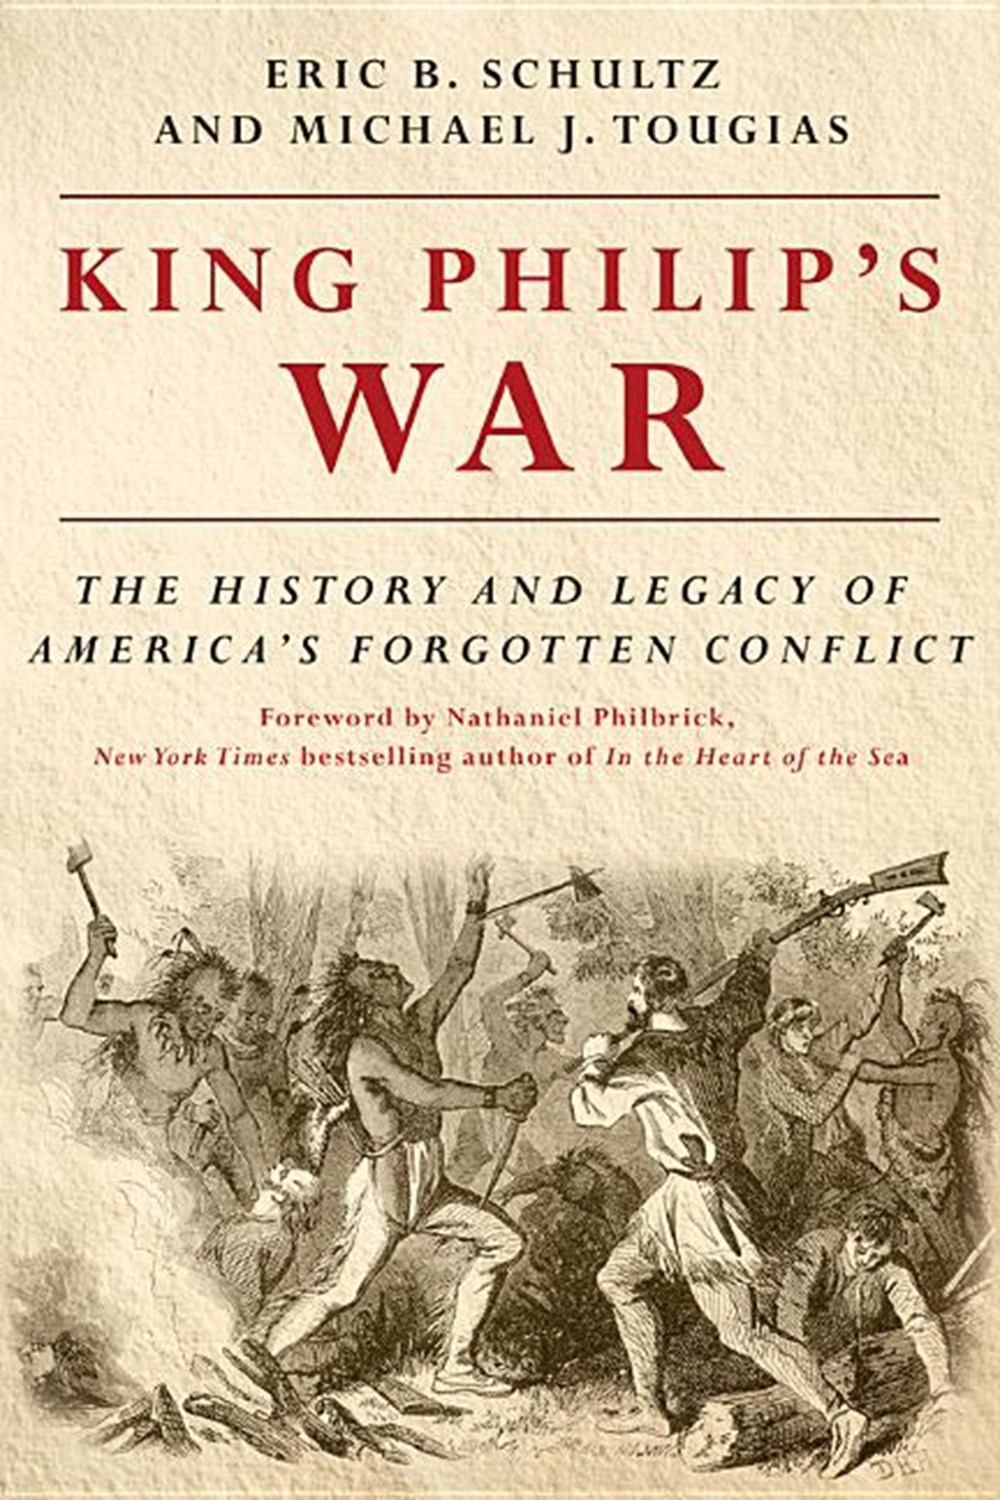 King Philip's War: The History and Legacy of America's Forgotten Conflict (Revised)